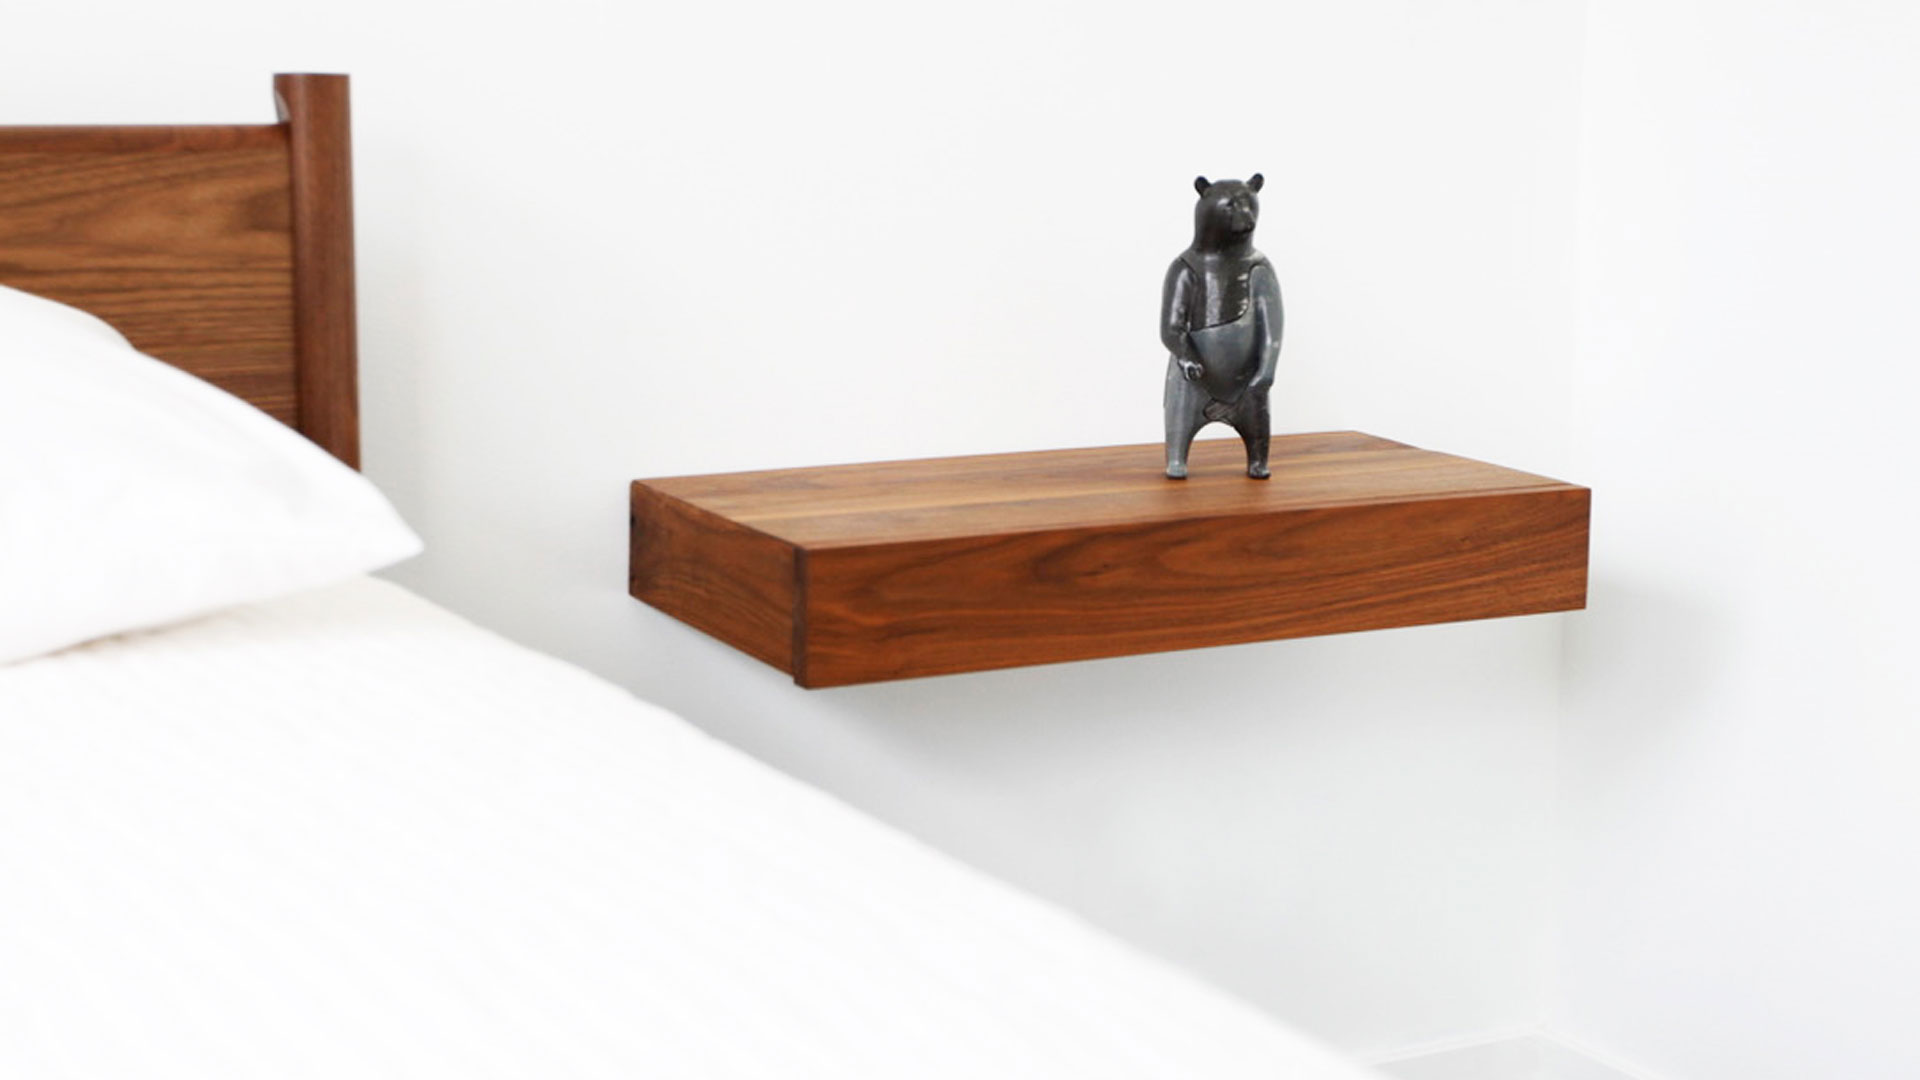 The Monkey Floating Side Table